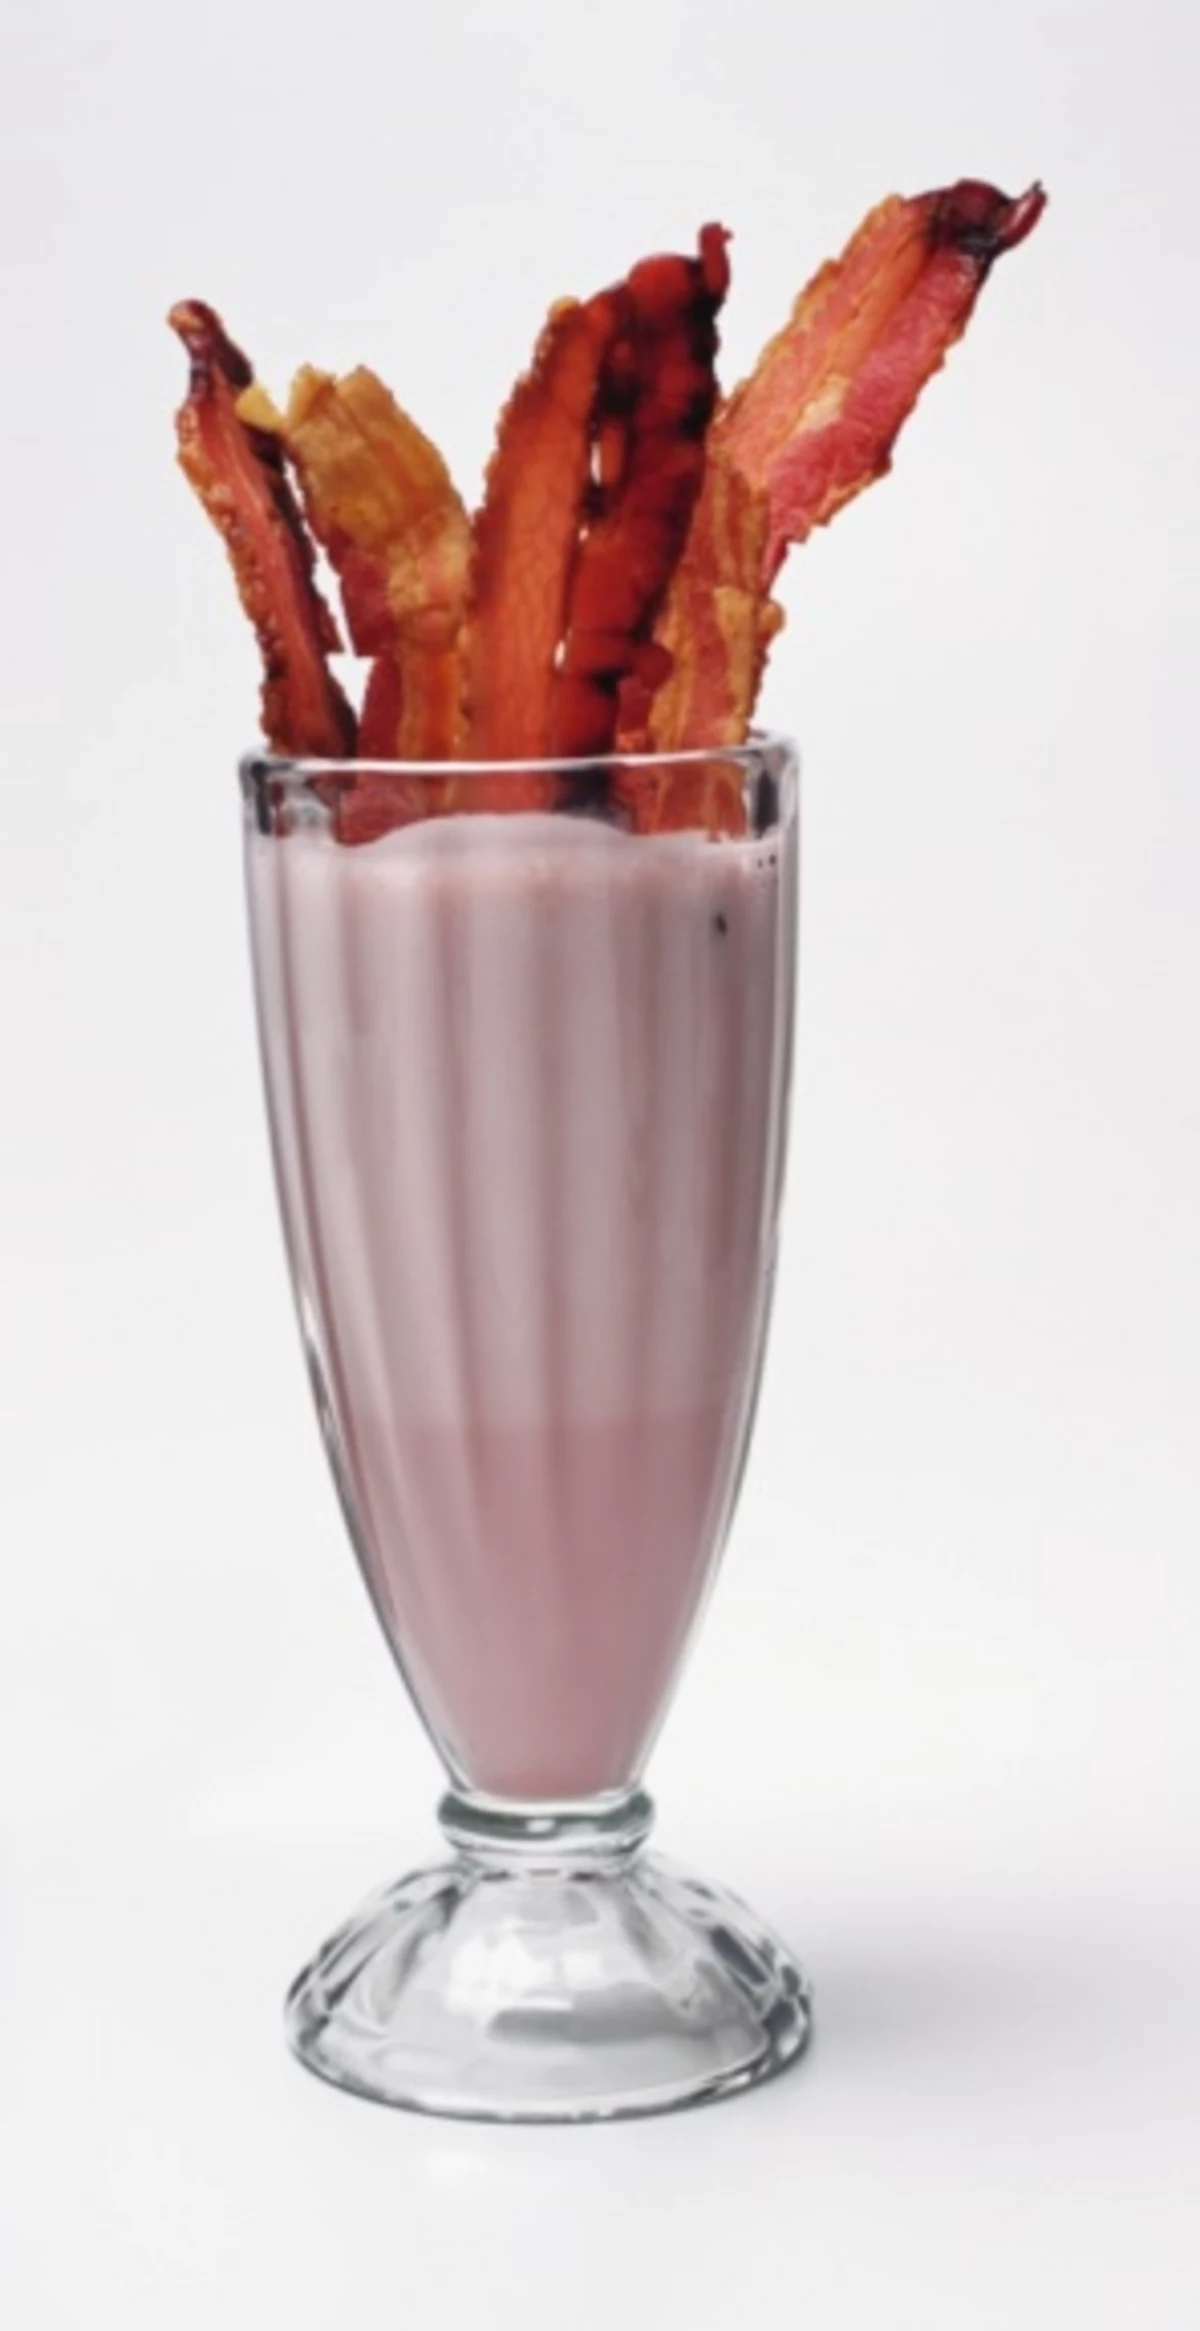 Bacon Beer Milkshake Is Delicious (Not to Mention Possibly Fatal)